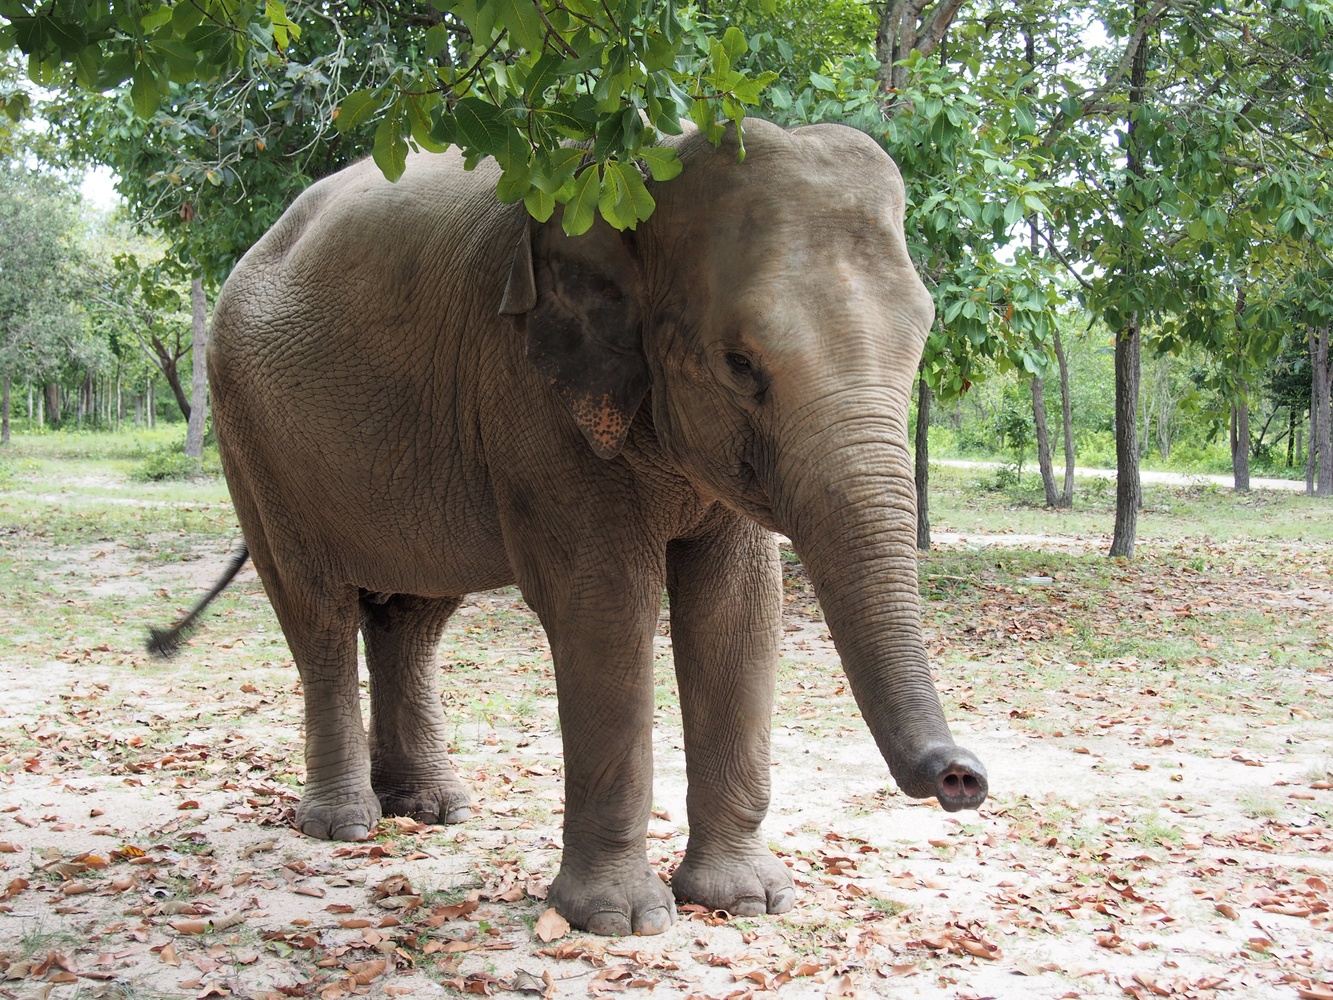 Elephants Conservation and Angkor Wat Discovery